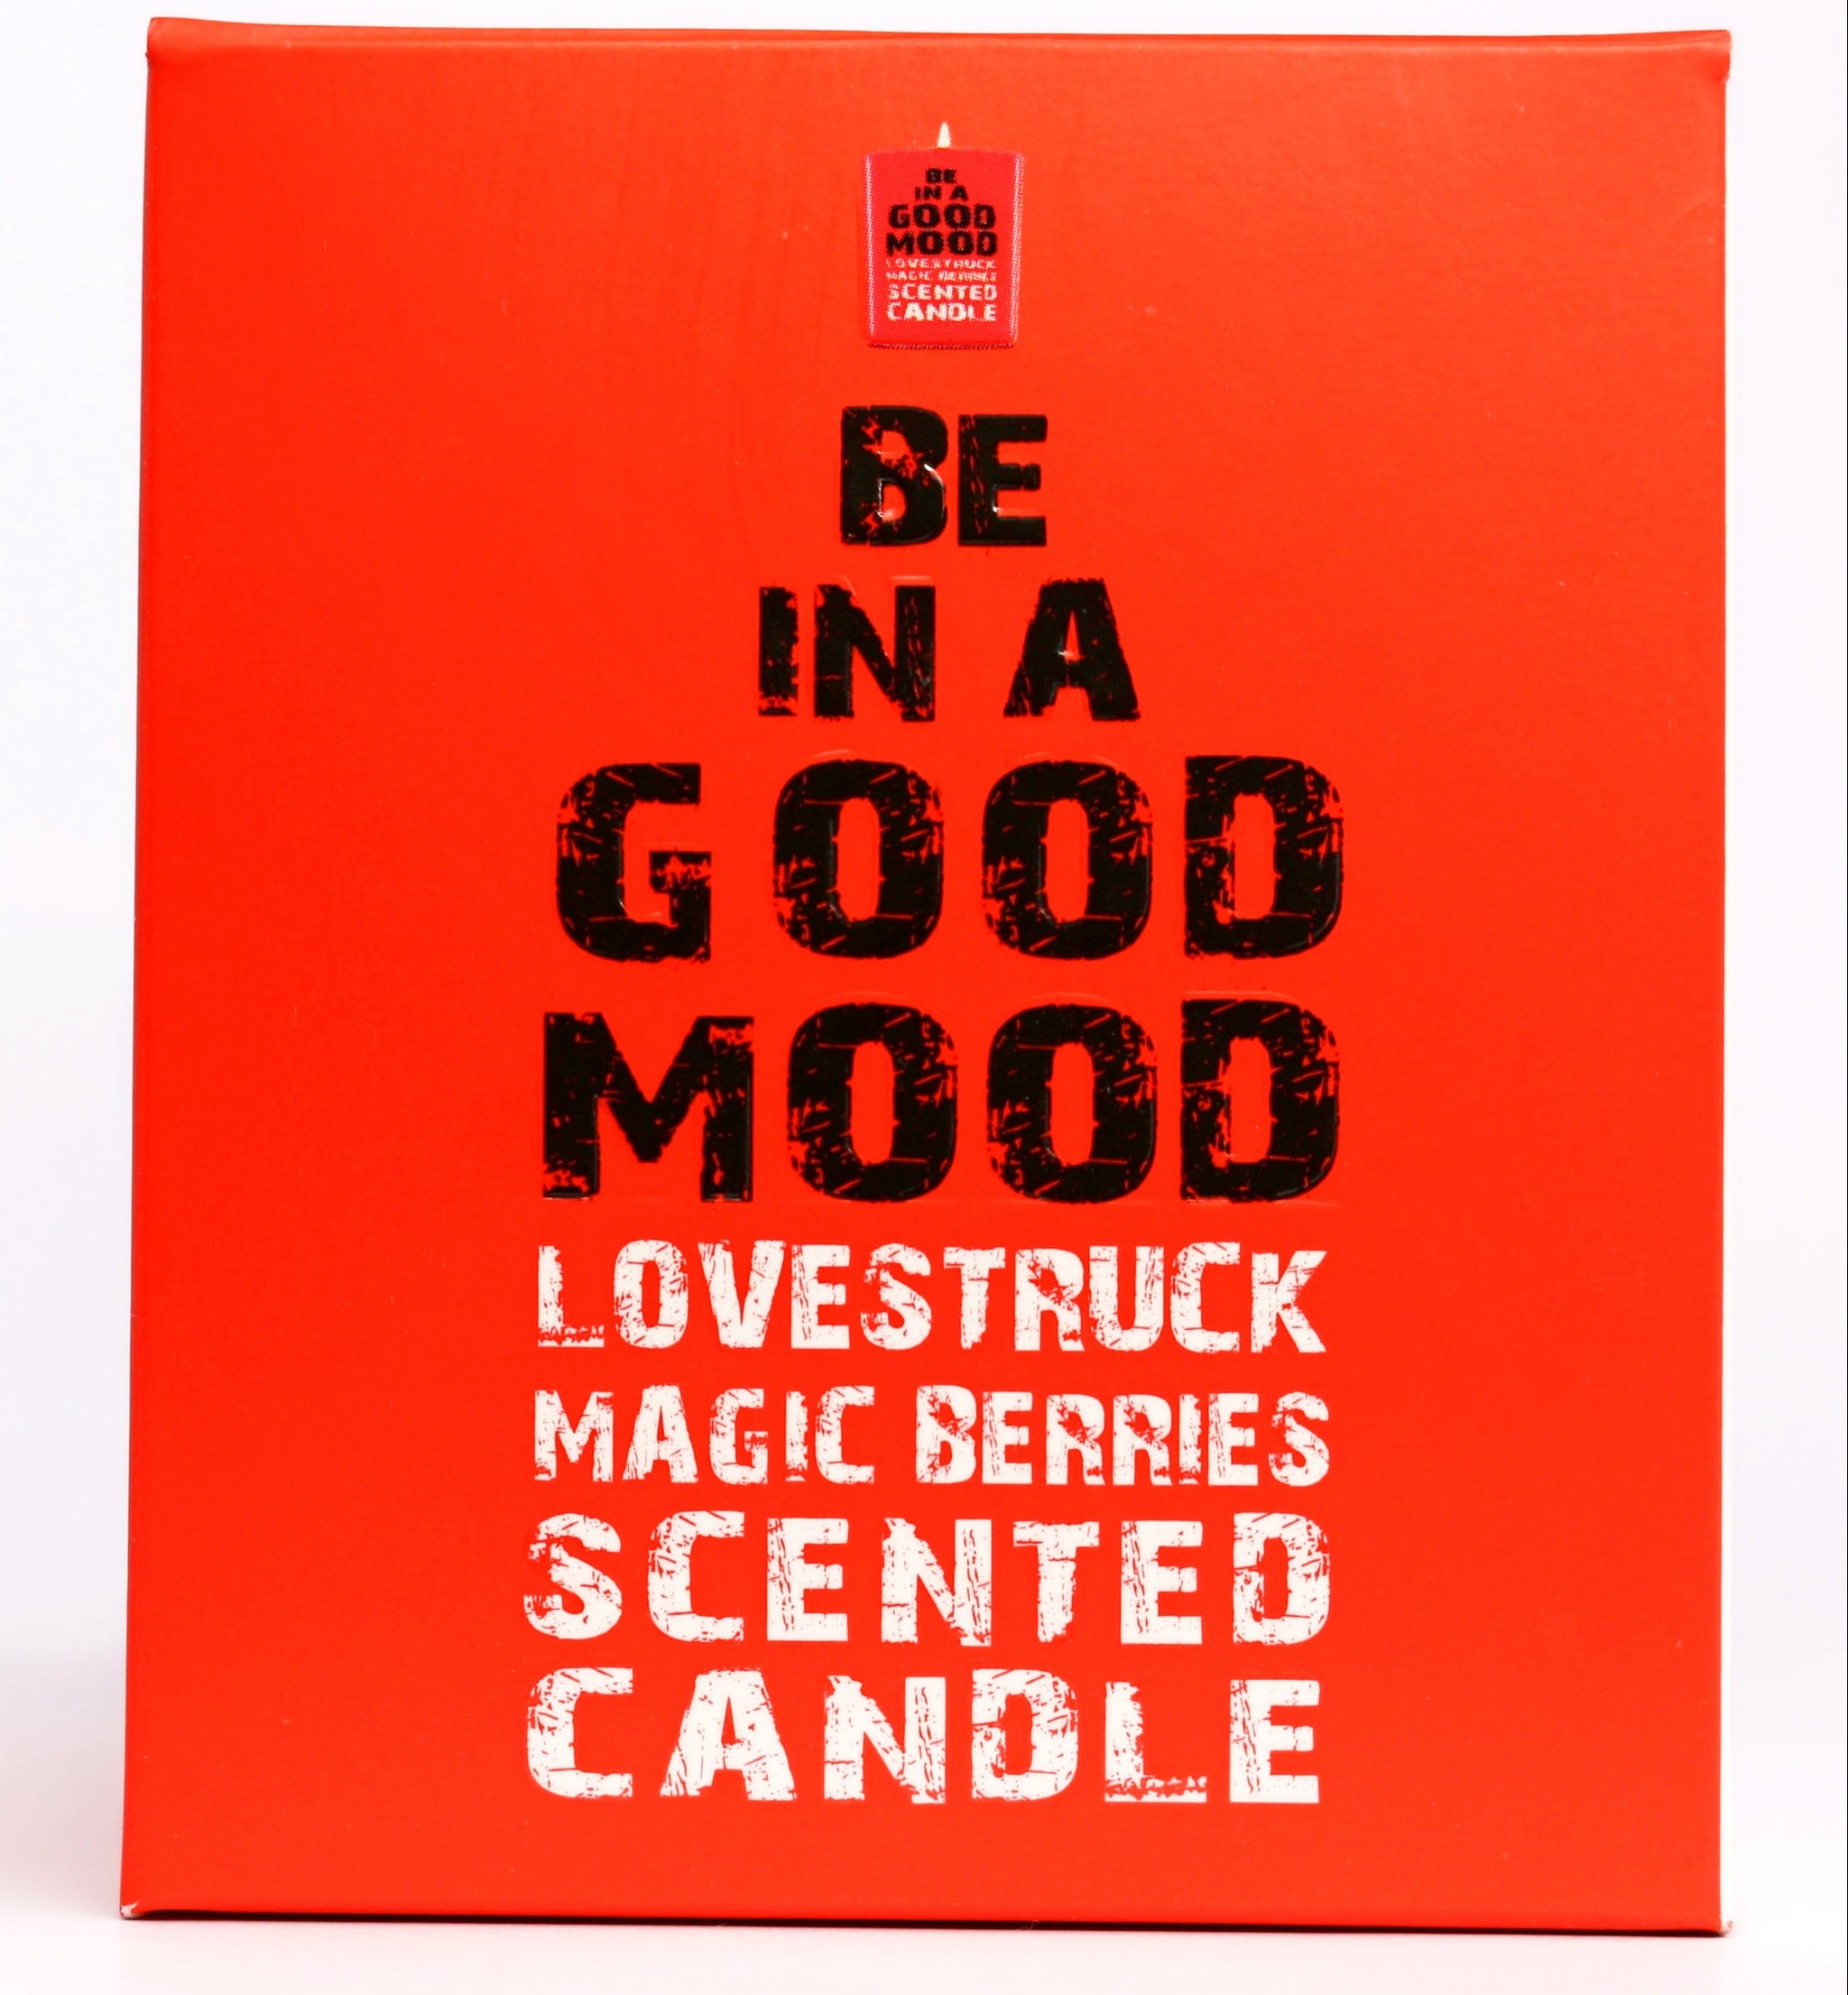 Be in a Good Mood Lovestruck Mixed Berries Scented Candle